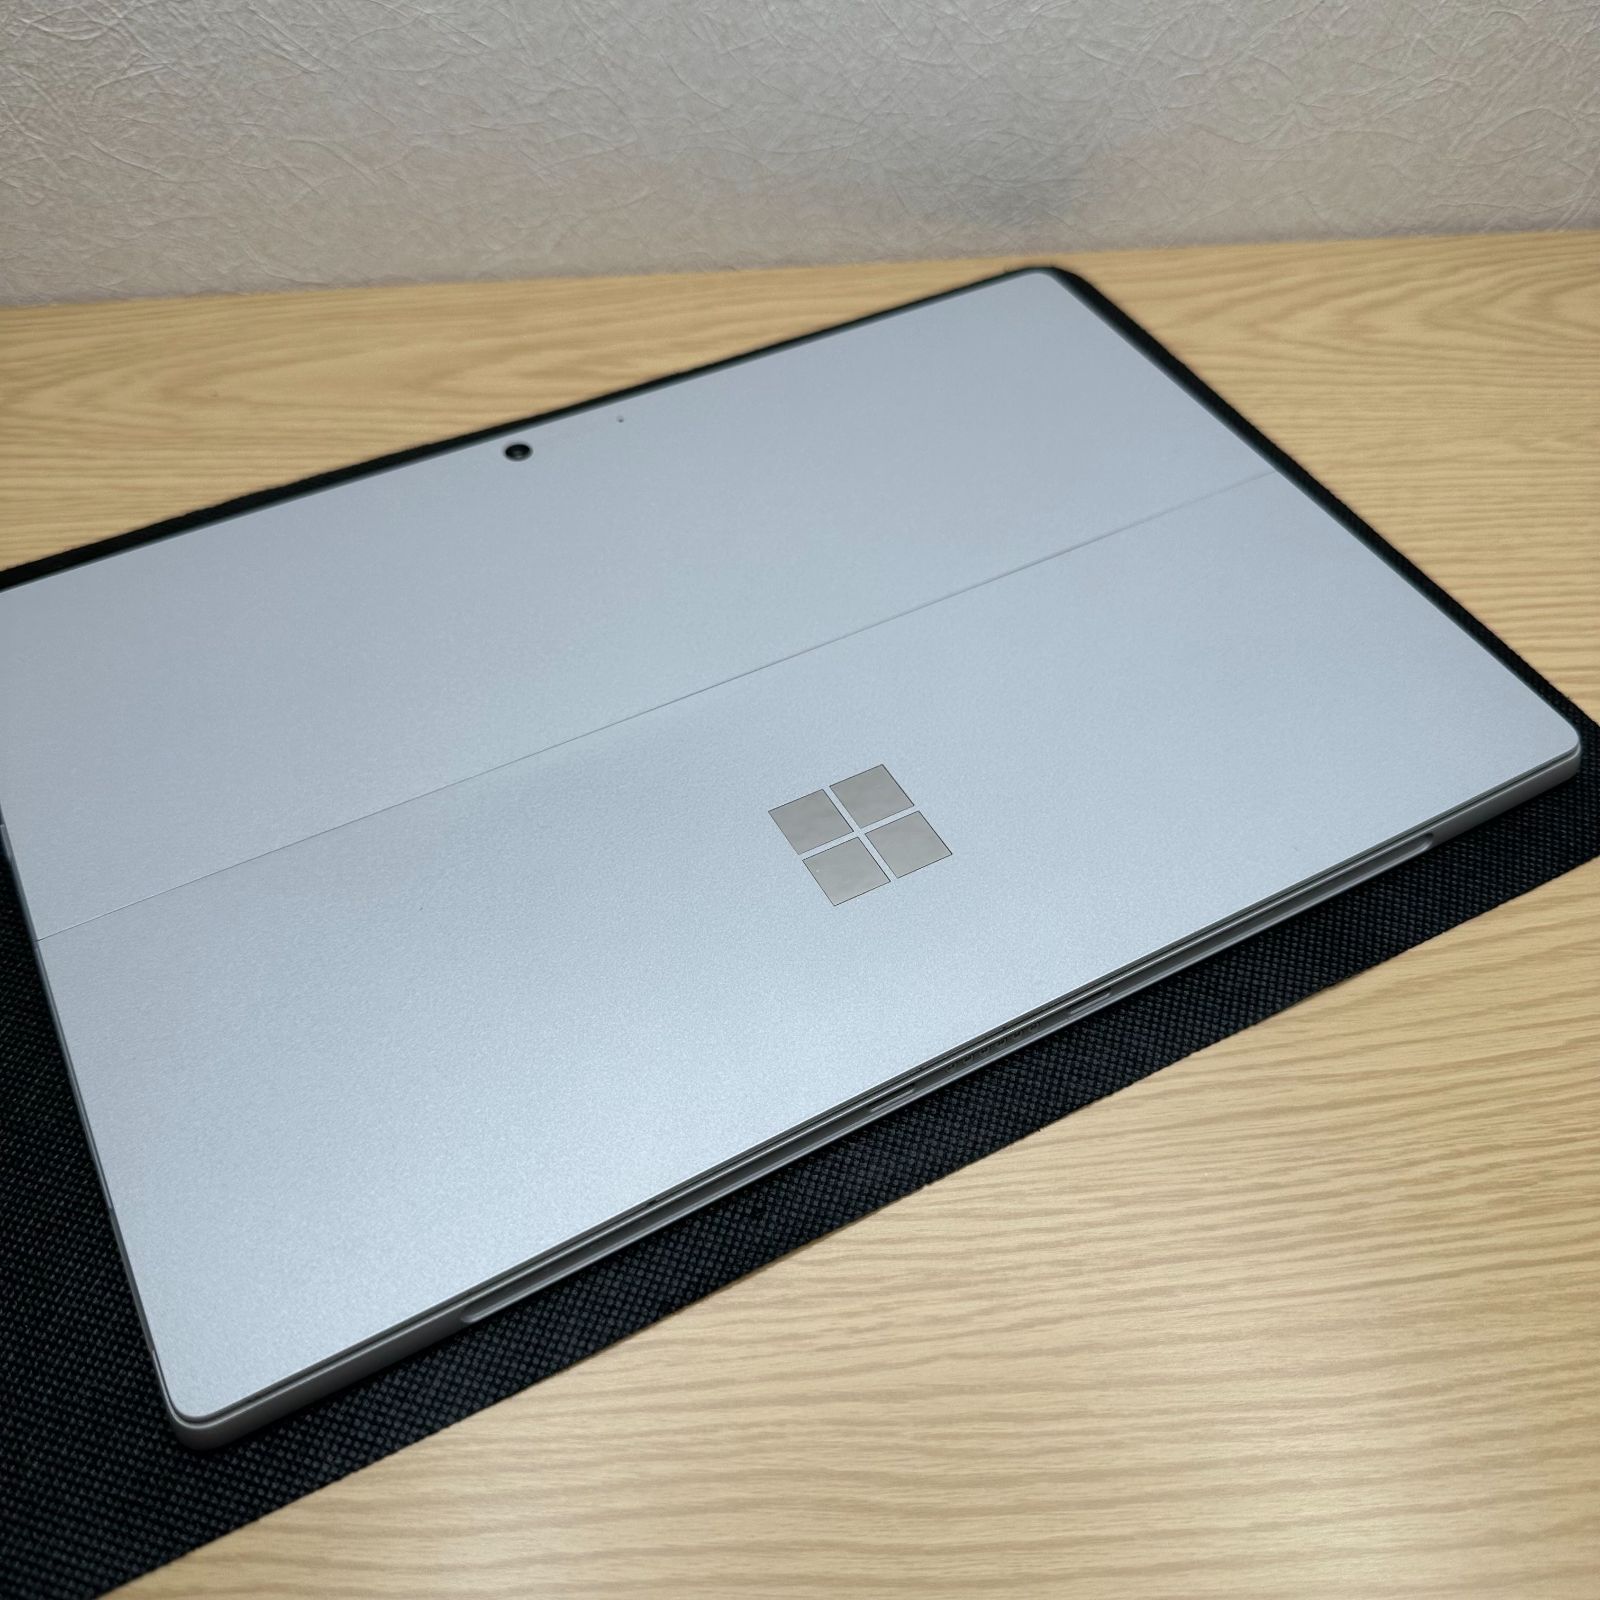 Microsoft Surface Pro 7 VDH-00012 Oficce Home & Business タイプ